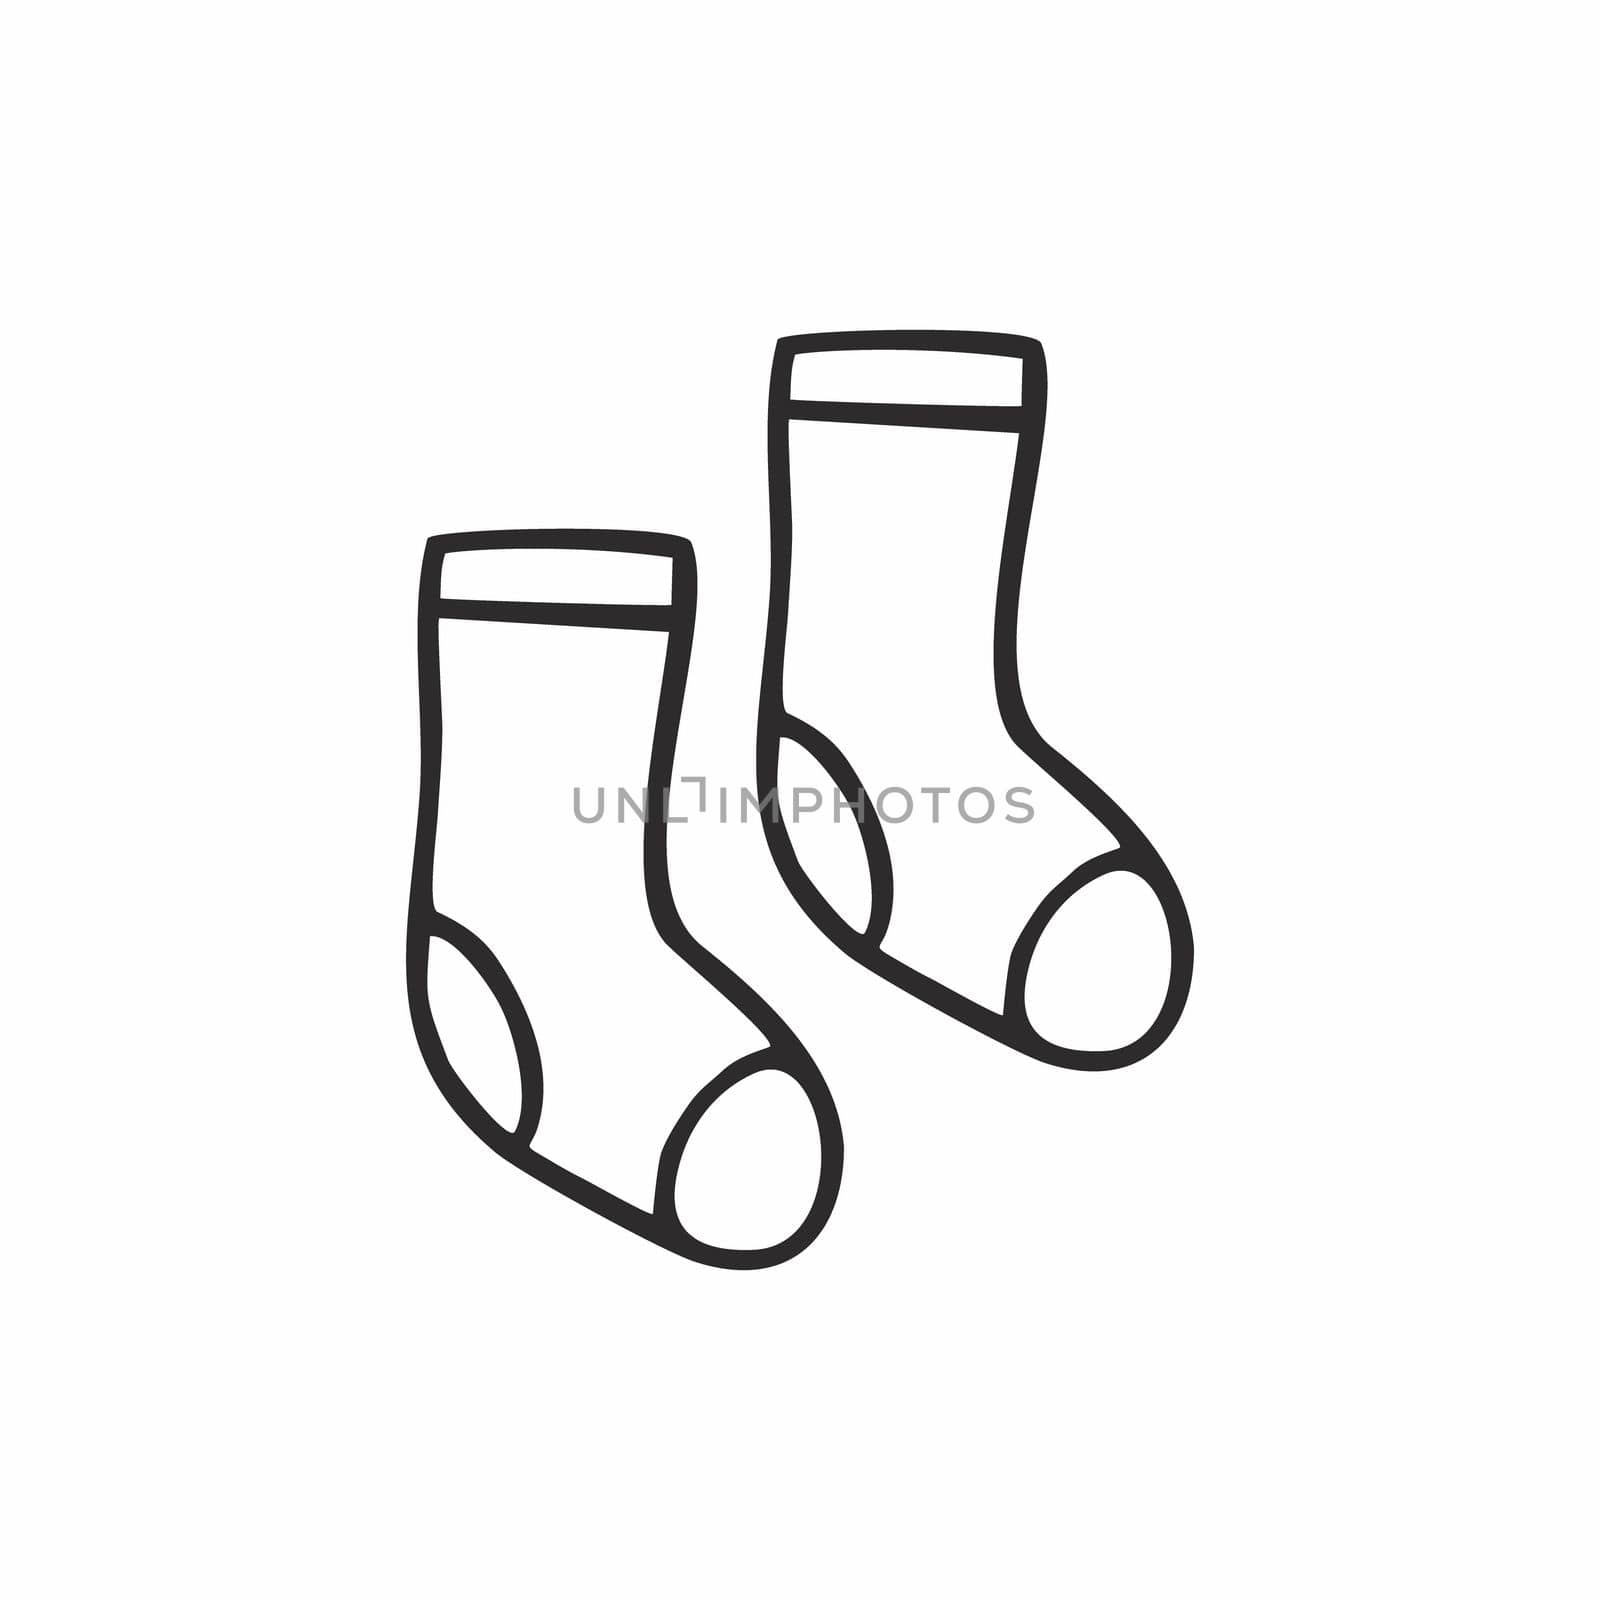 Two Doodle socks drawn with a single black contour line. Vector hand-drawn illustrations. Icon, pictogram, single element design. by polinka_art